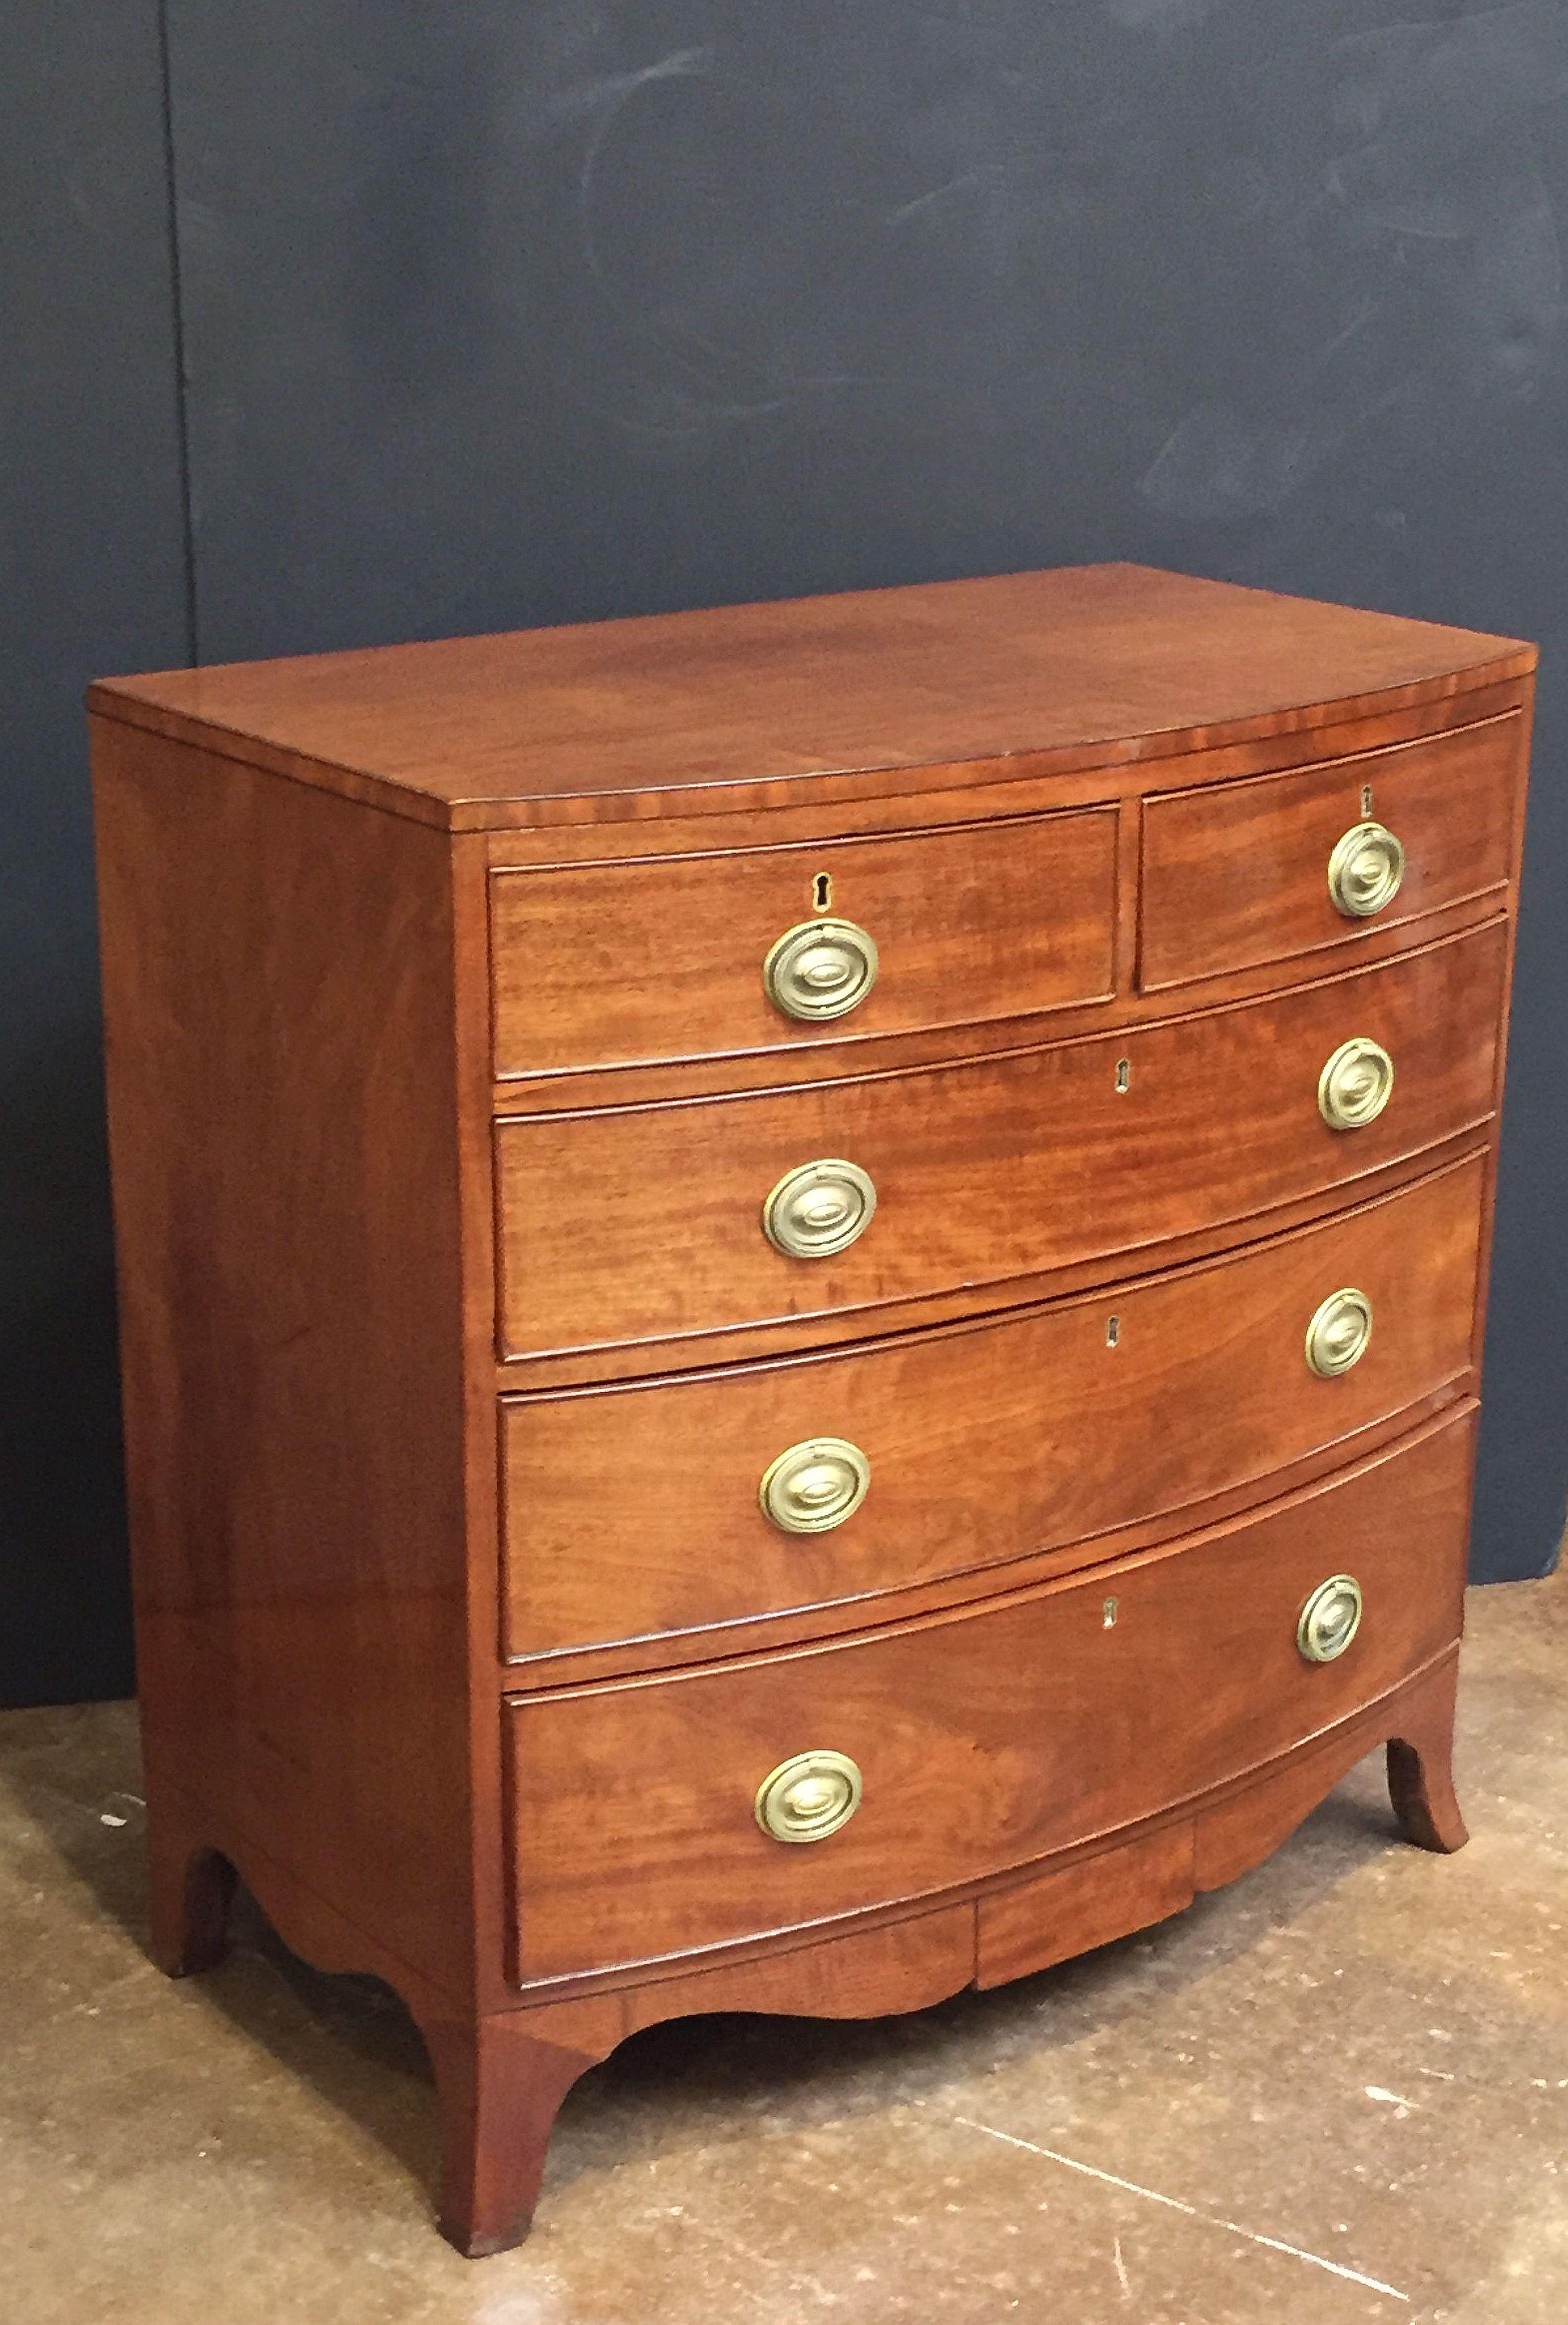 A handsome English bow-front chest of drawers of mahogany from the George III period, featuring a bowed top over a frieze of two small beaded drawers and three beaded long drawers, with oval brass pulls, and set upon a serpentine splayed foot base.